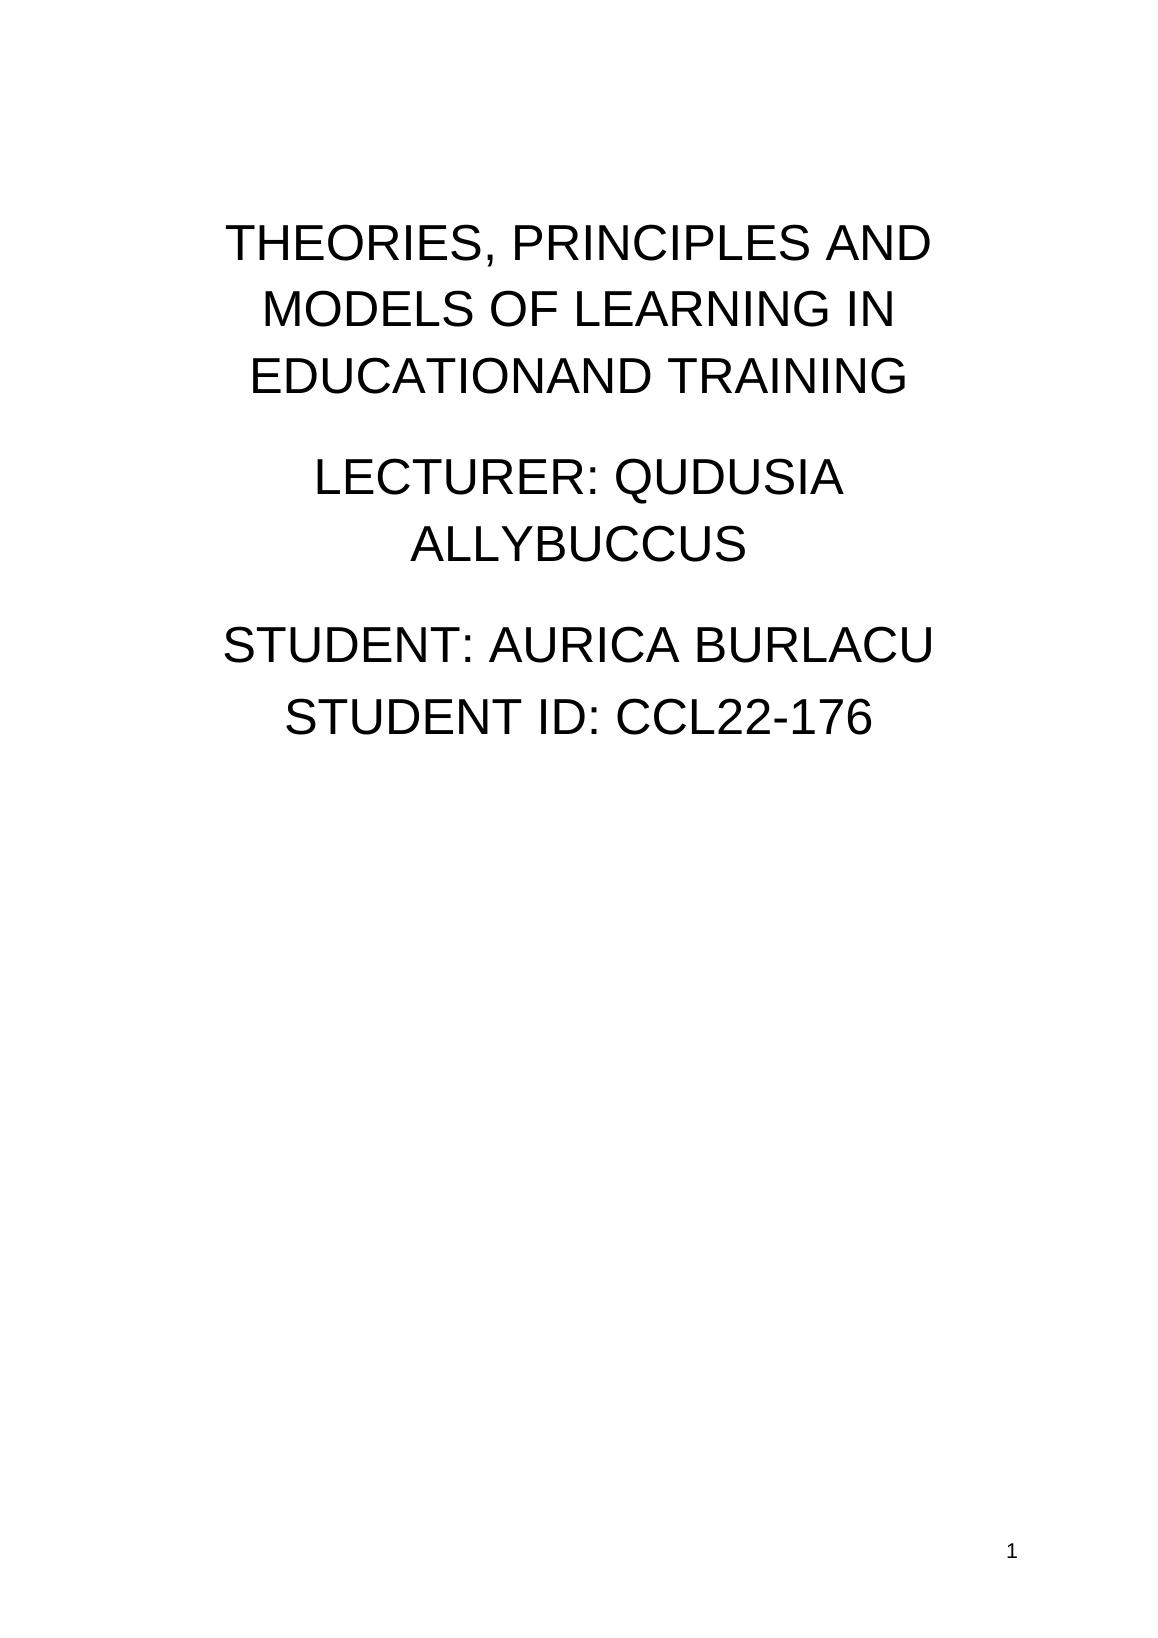 THEORIES, PRINCIPLES AND MODELS OF LEARNING IN EDUCATION_1